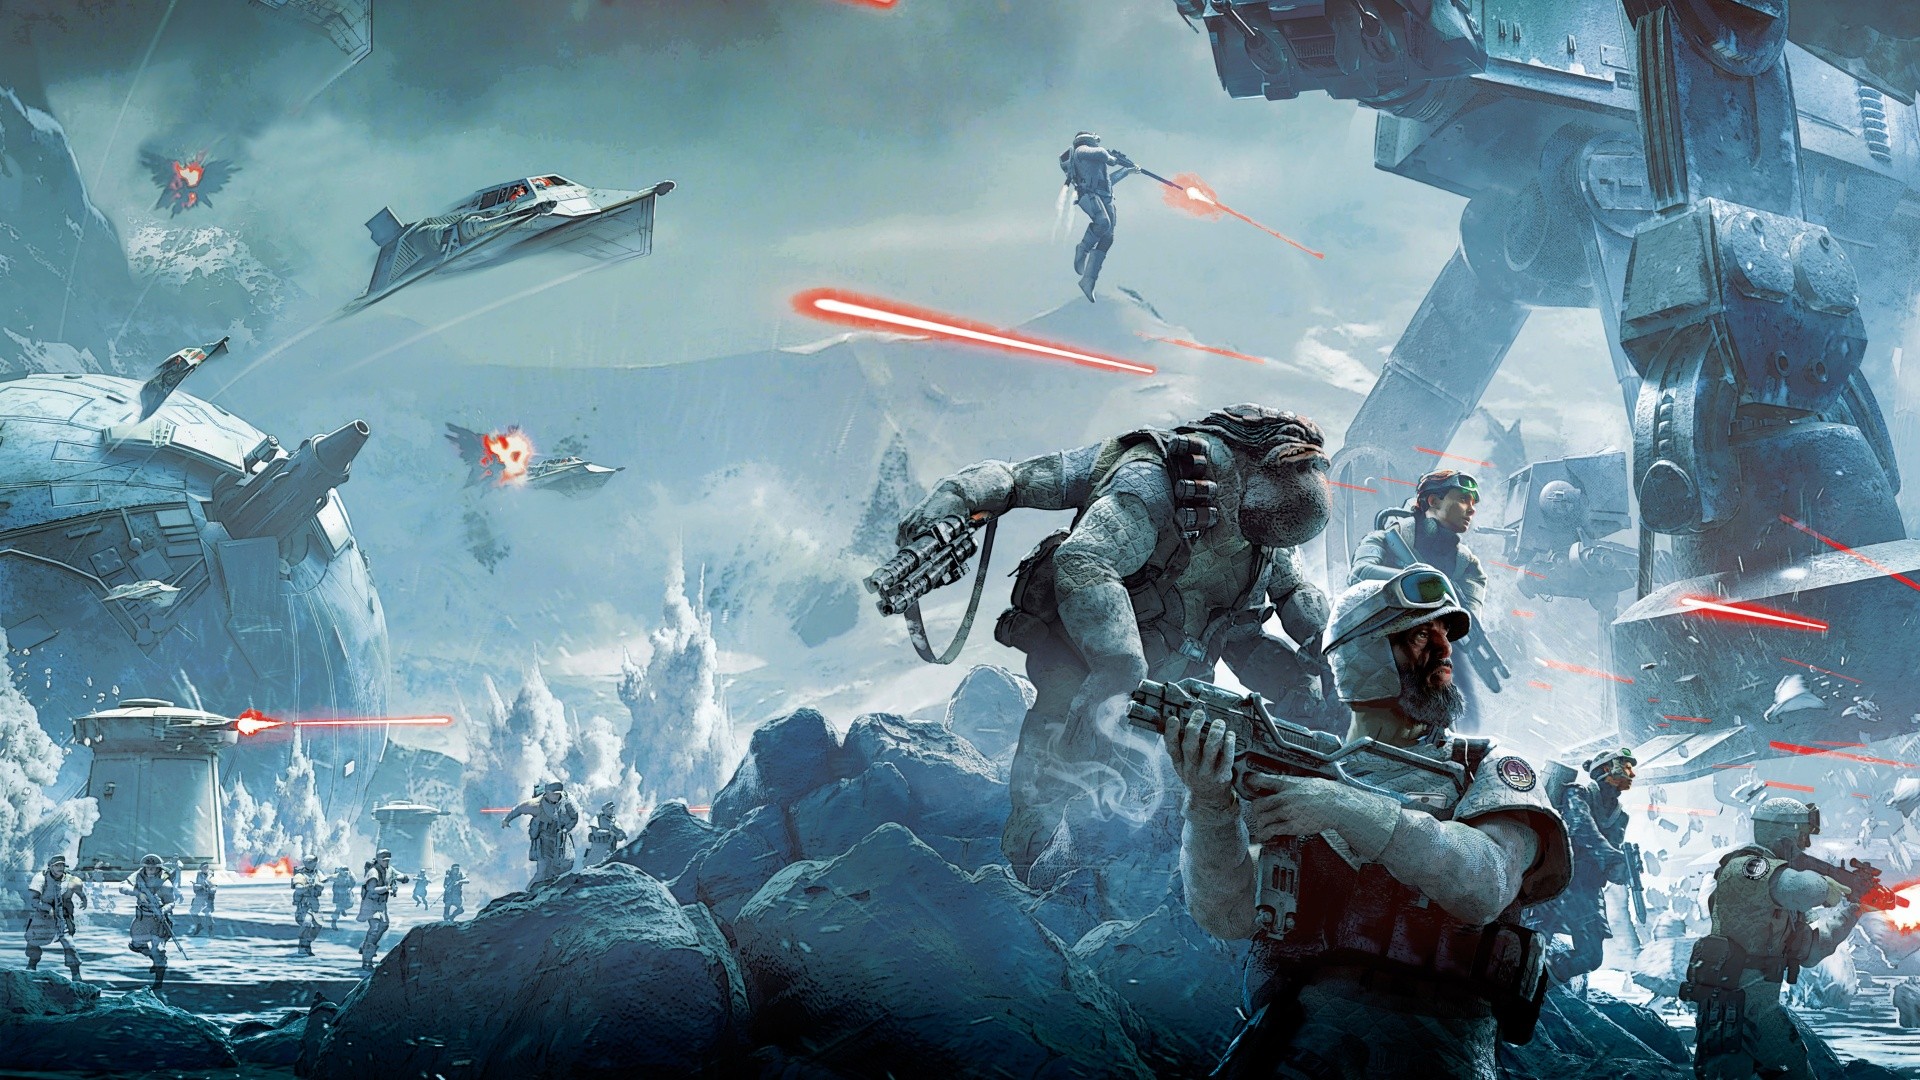 Star Wars Video Games Battle Hoth Science Fiction Video Game Art 1920x1080